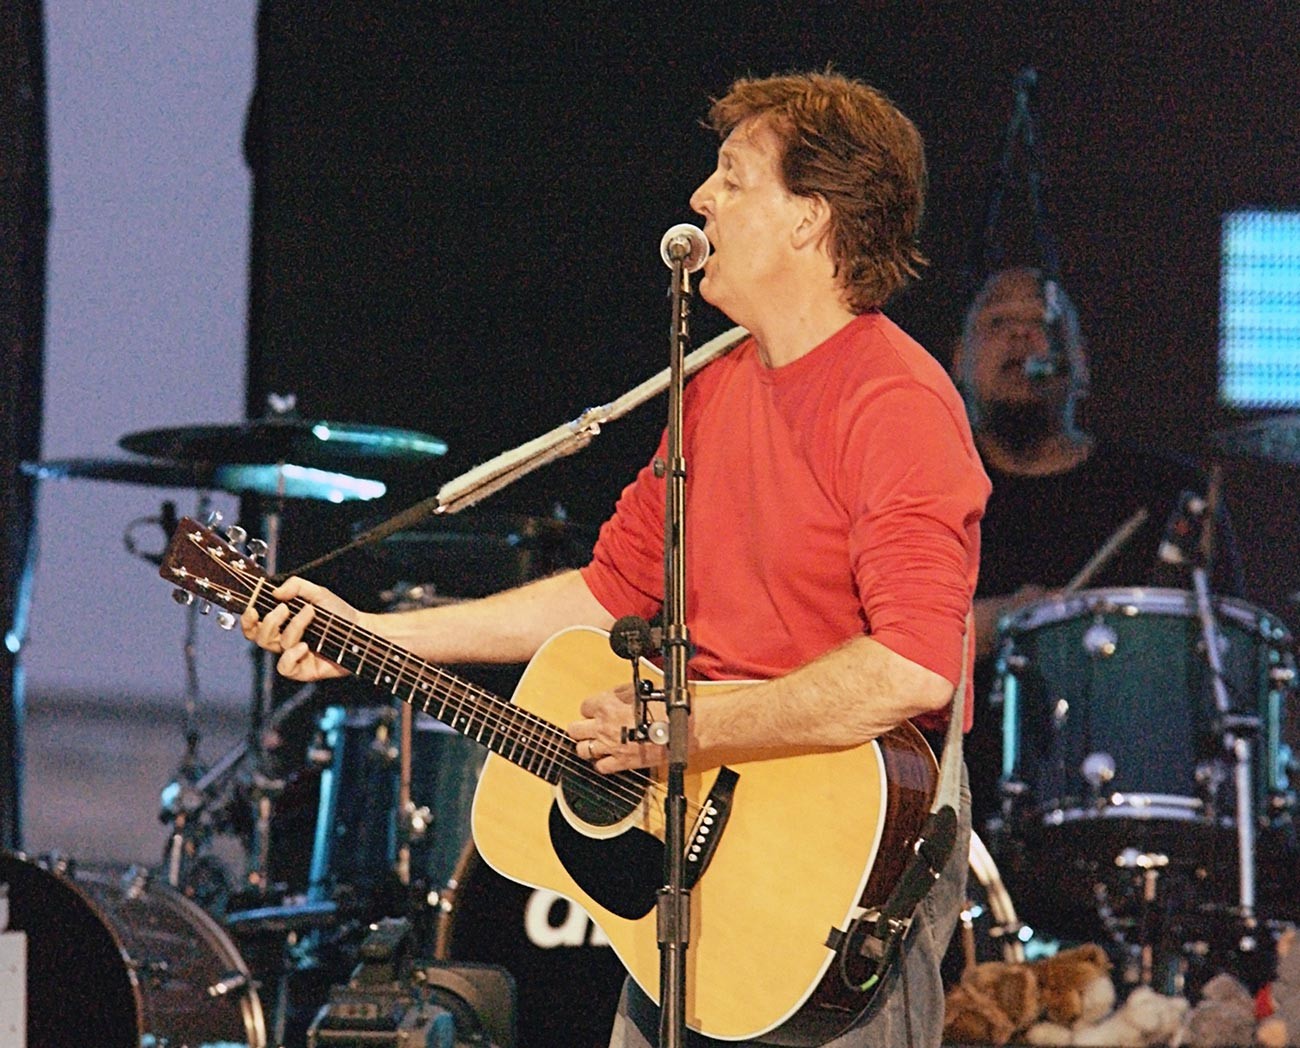 McCartney's concert in Moscow